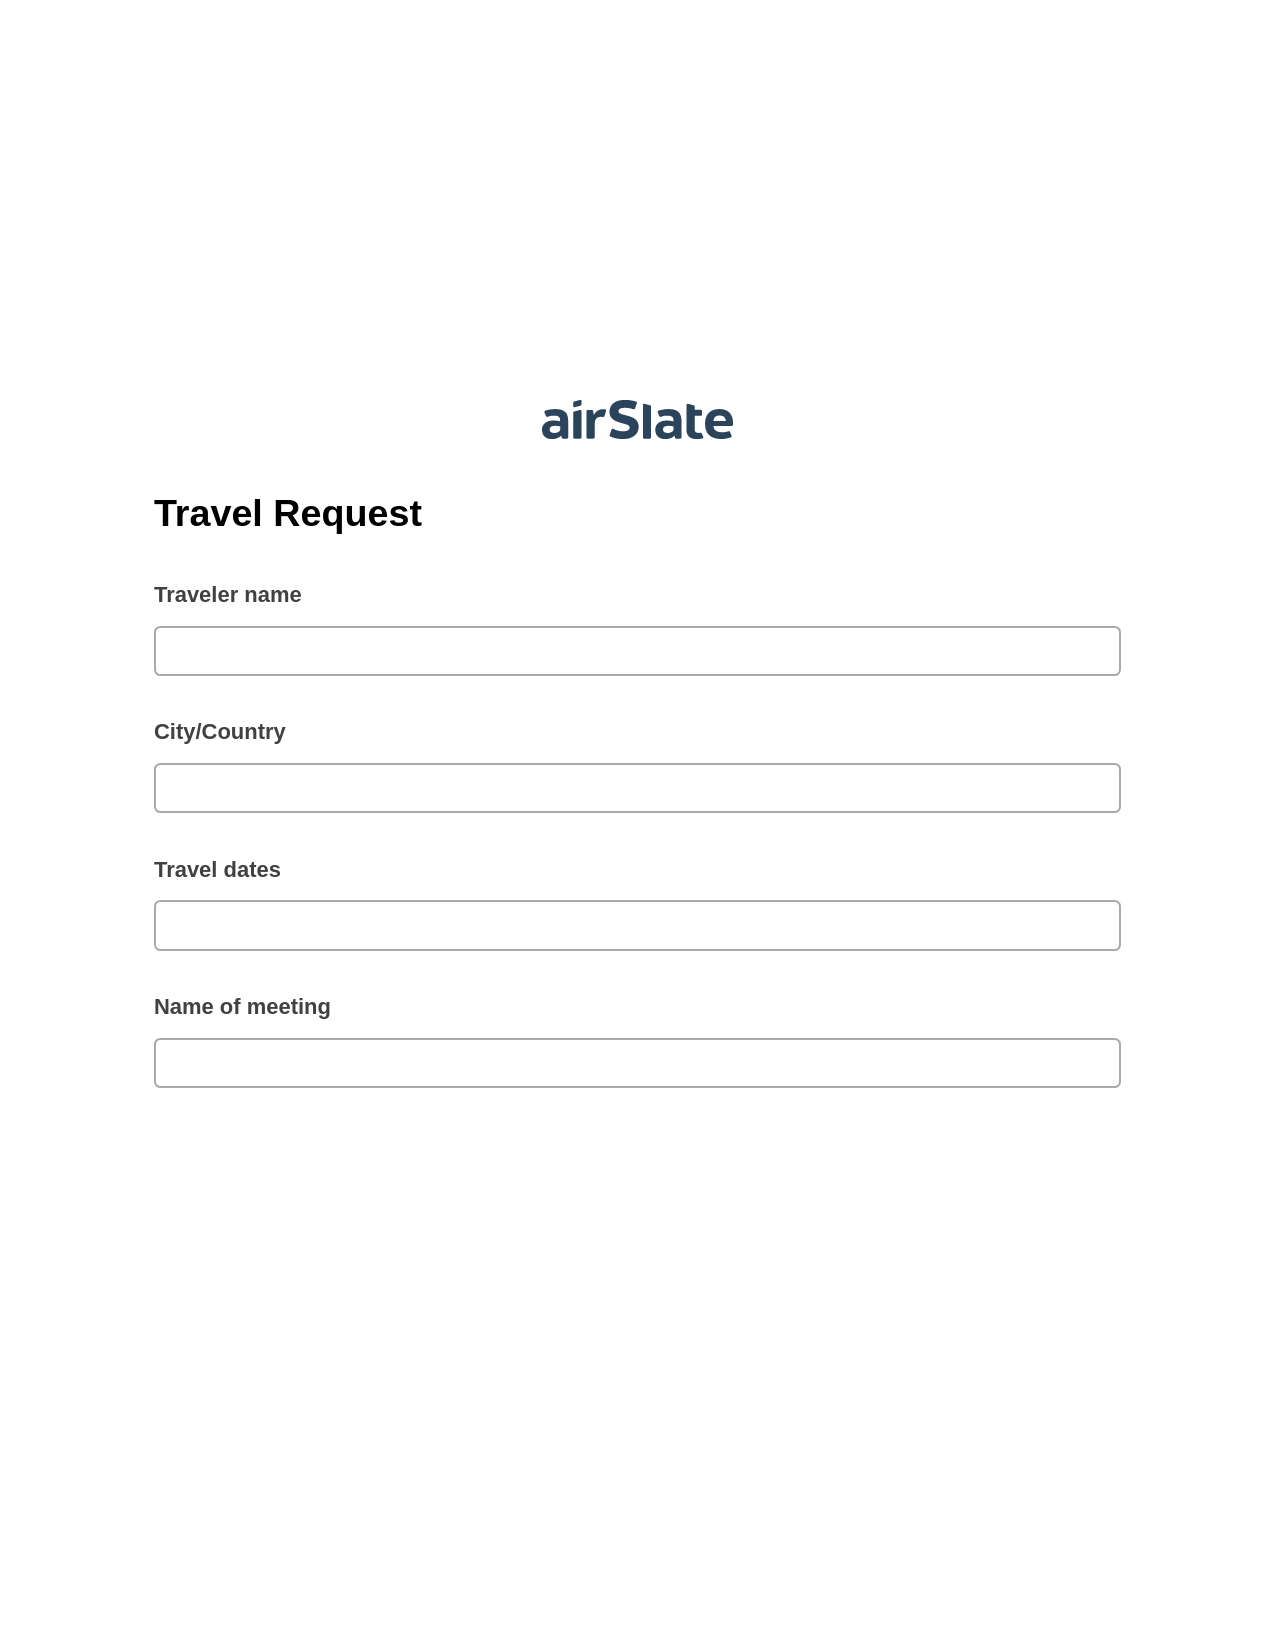 Travel Request Pre-fill from CSV File Bot, Lock the slate bot, Export to Excel 365 Bot